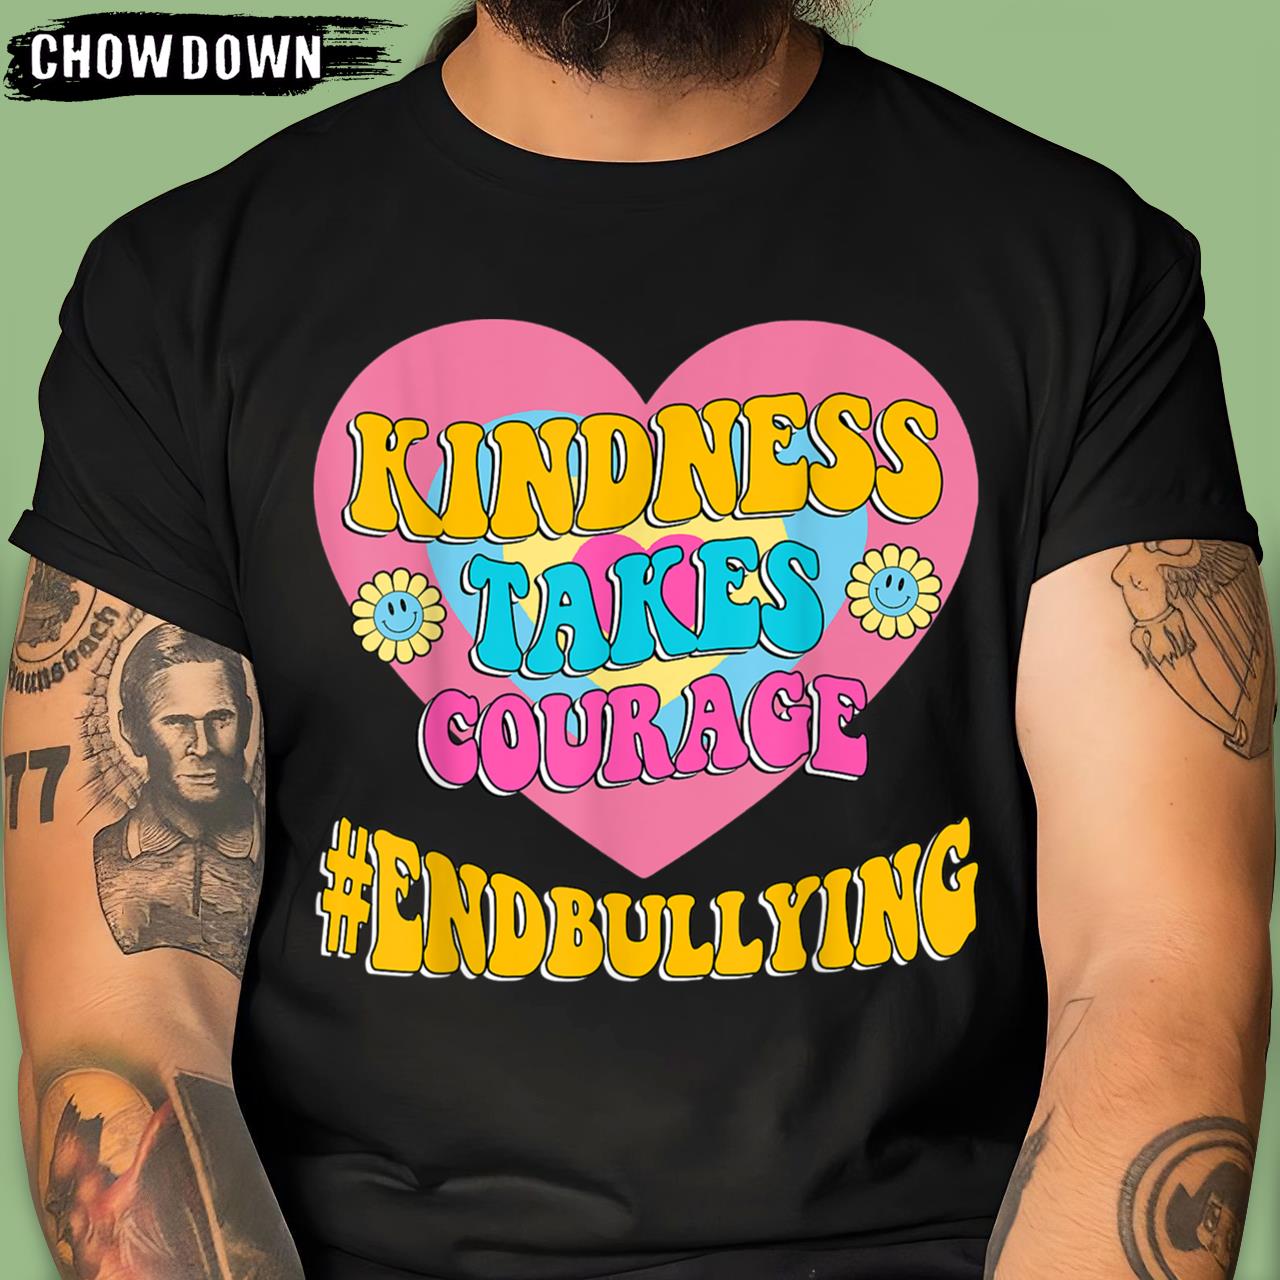 Hippie Kindness Take Courage Heart Be Kind End Bullying Stop Bullying Anti Bullying T-Shirt